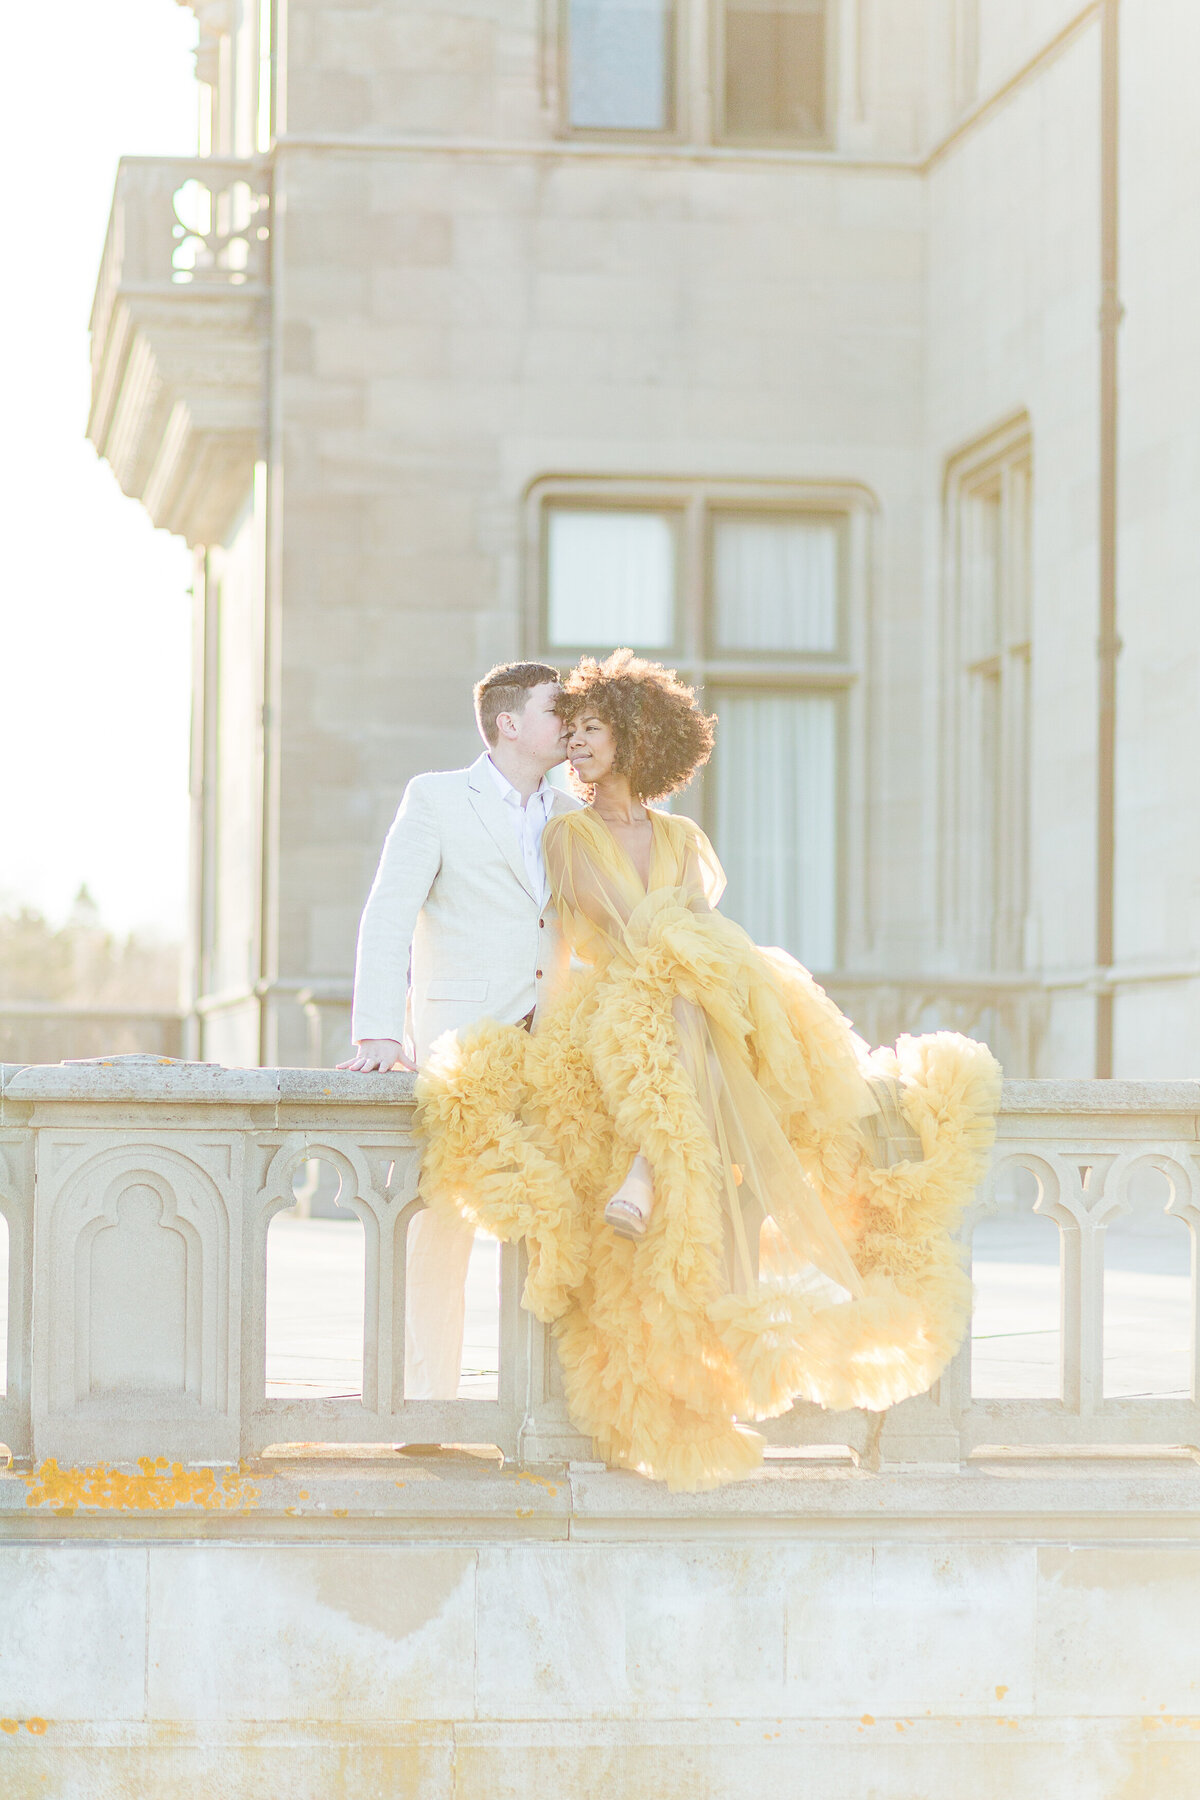 Man and woman are sitting on Salve Regina's stone walls for their sunset engagement photoshoot. The woman is in an elaborate yellow organza gown and the man in a white suit. The woman is looking toward the man who is gently kissing her on the cheek. Salve Regina's buildings are featured prominently in the background. Captured at golden hour creating a soft haze. Photo by Lia Rose Weddings, best Rhode Island Wedding and Engagement Photographer